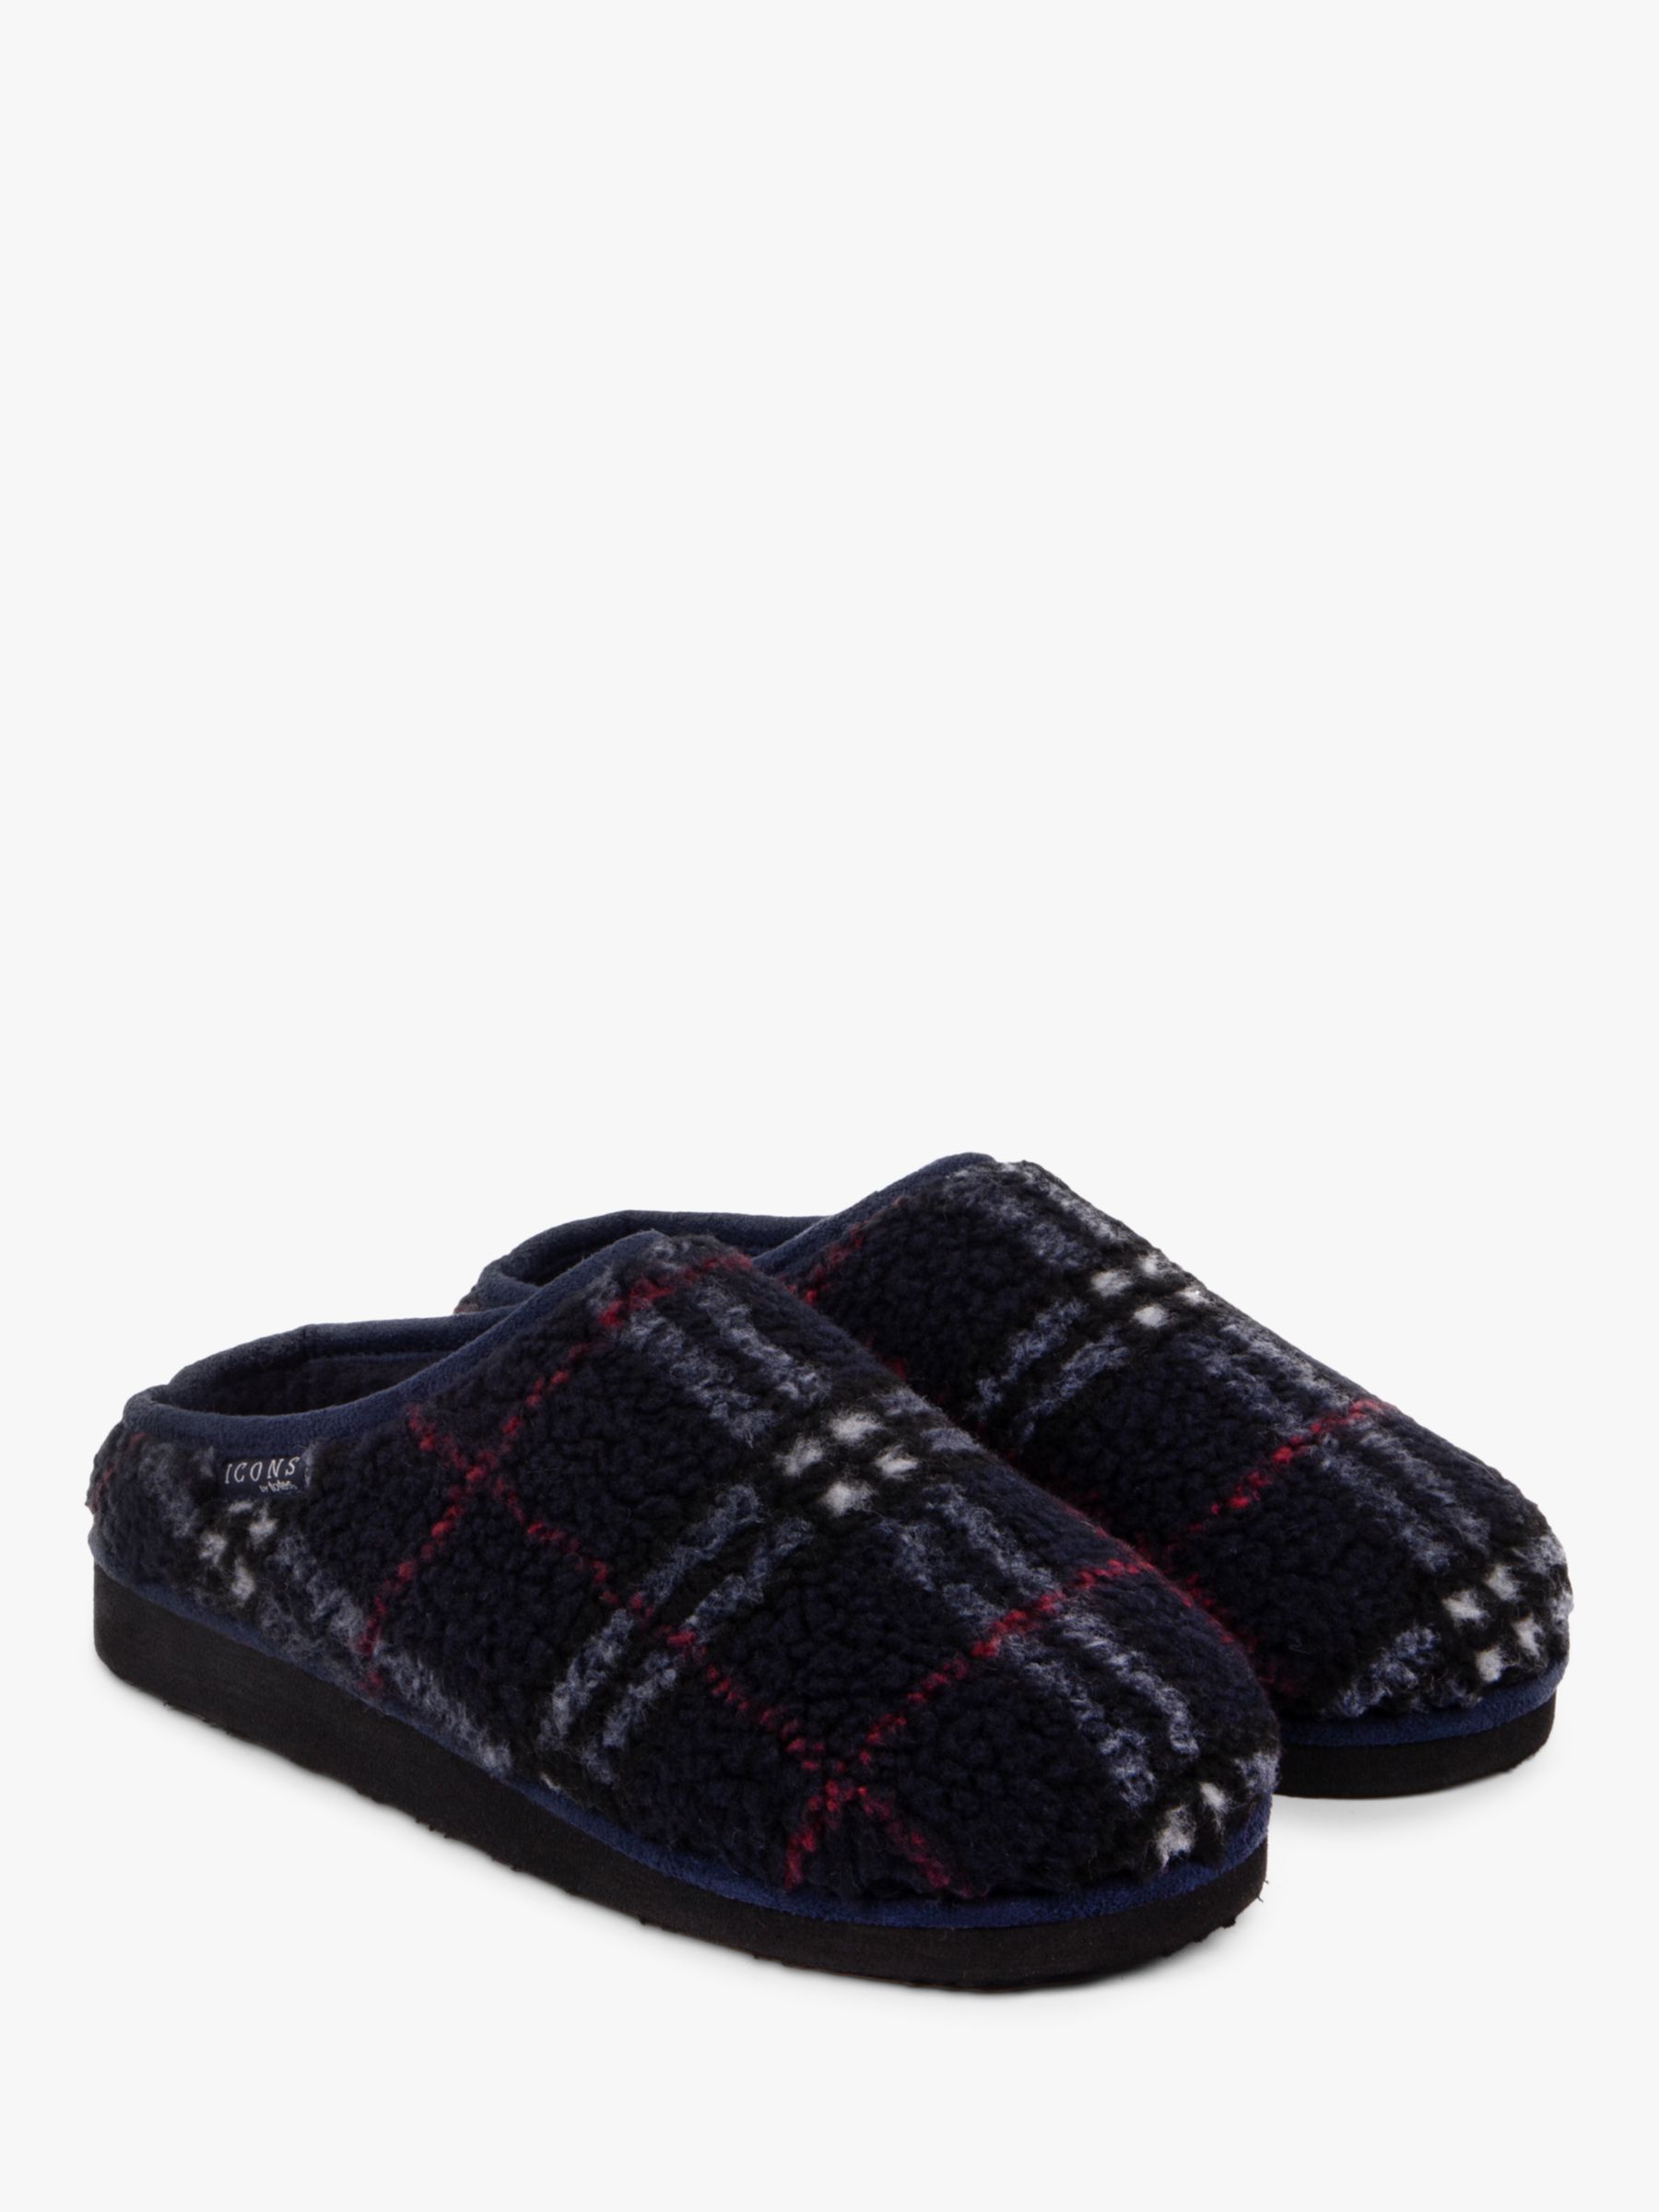 totes Borg Check Mule Slippers, Navy/Multi, 9